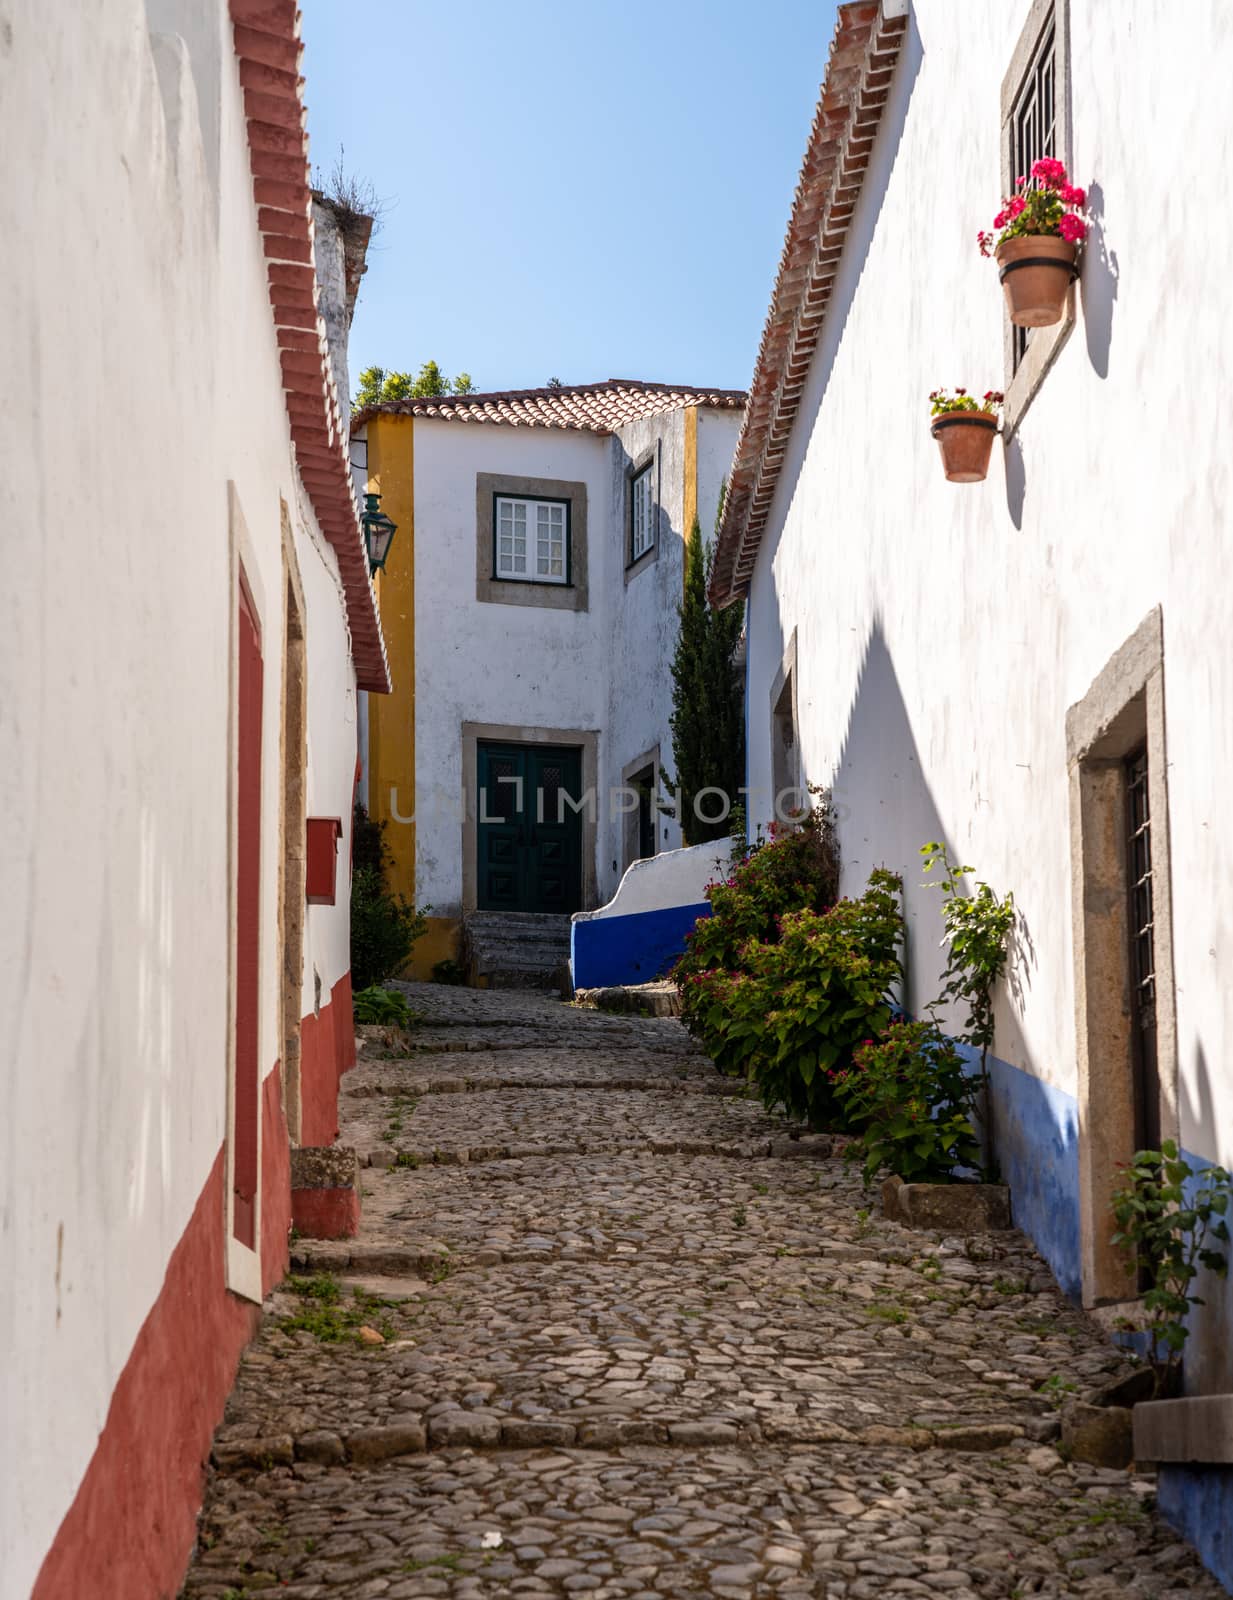 Narrow street with flowers in the old medieval walled city of Obidos in Portugal